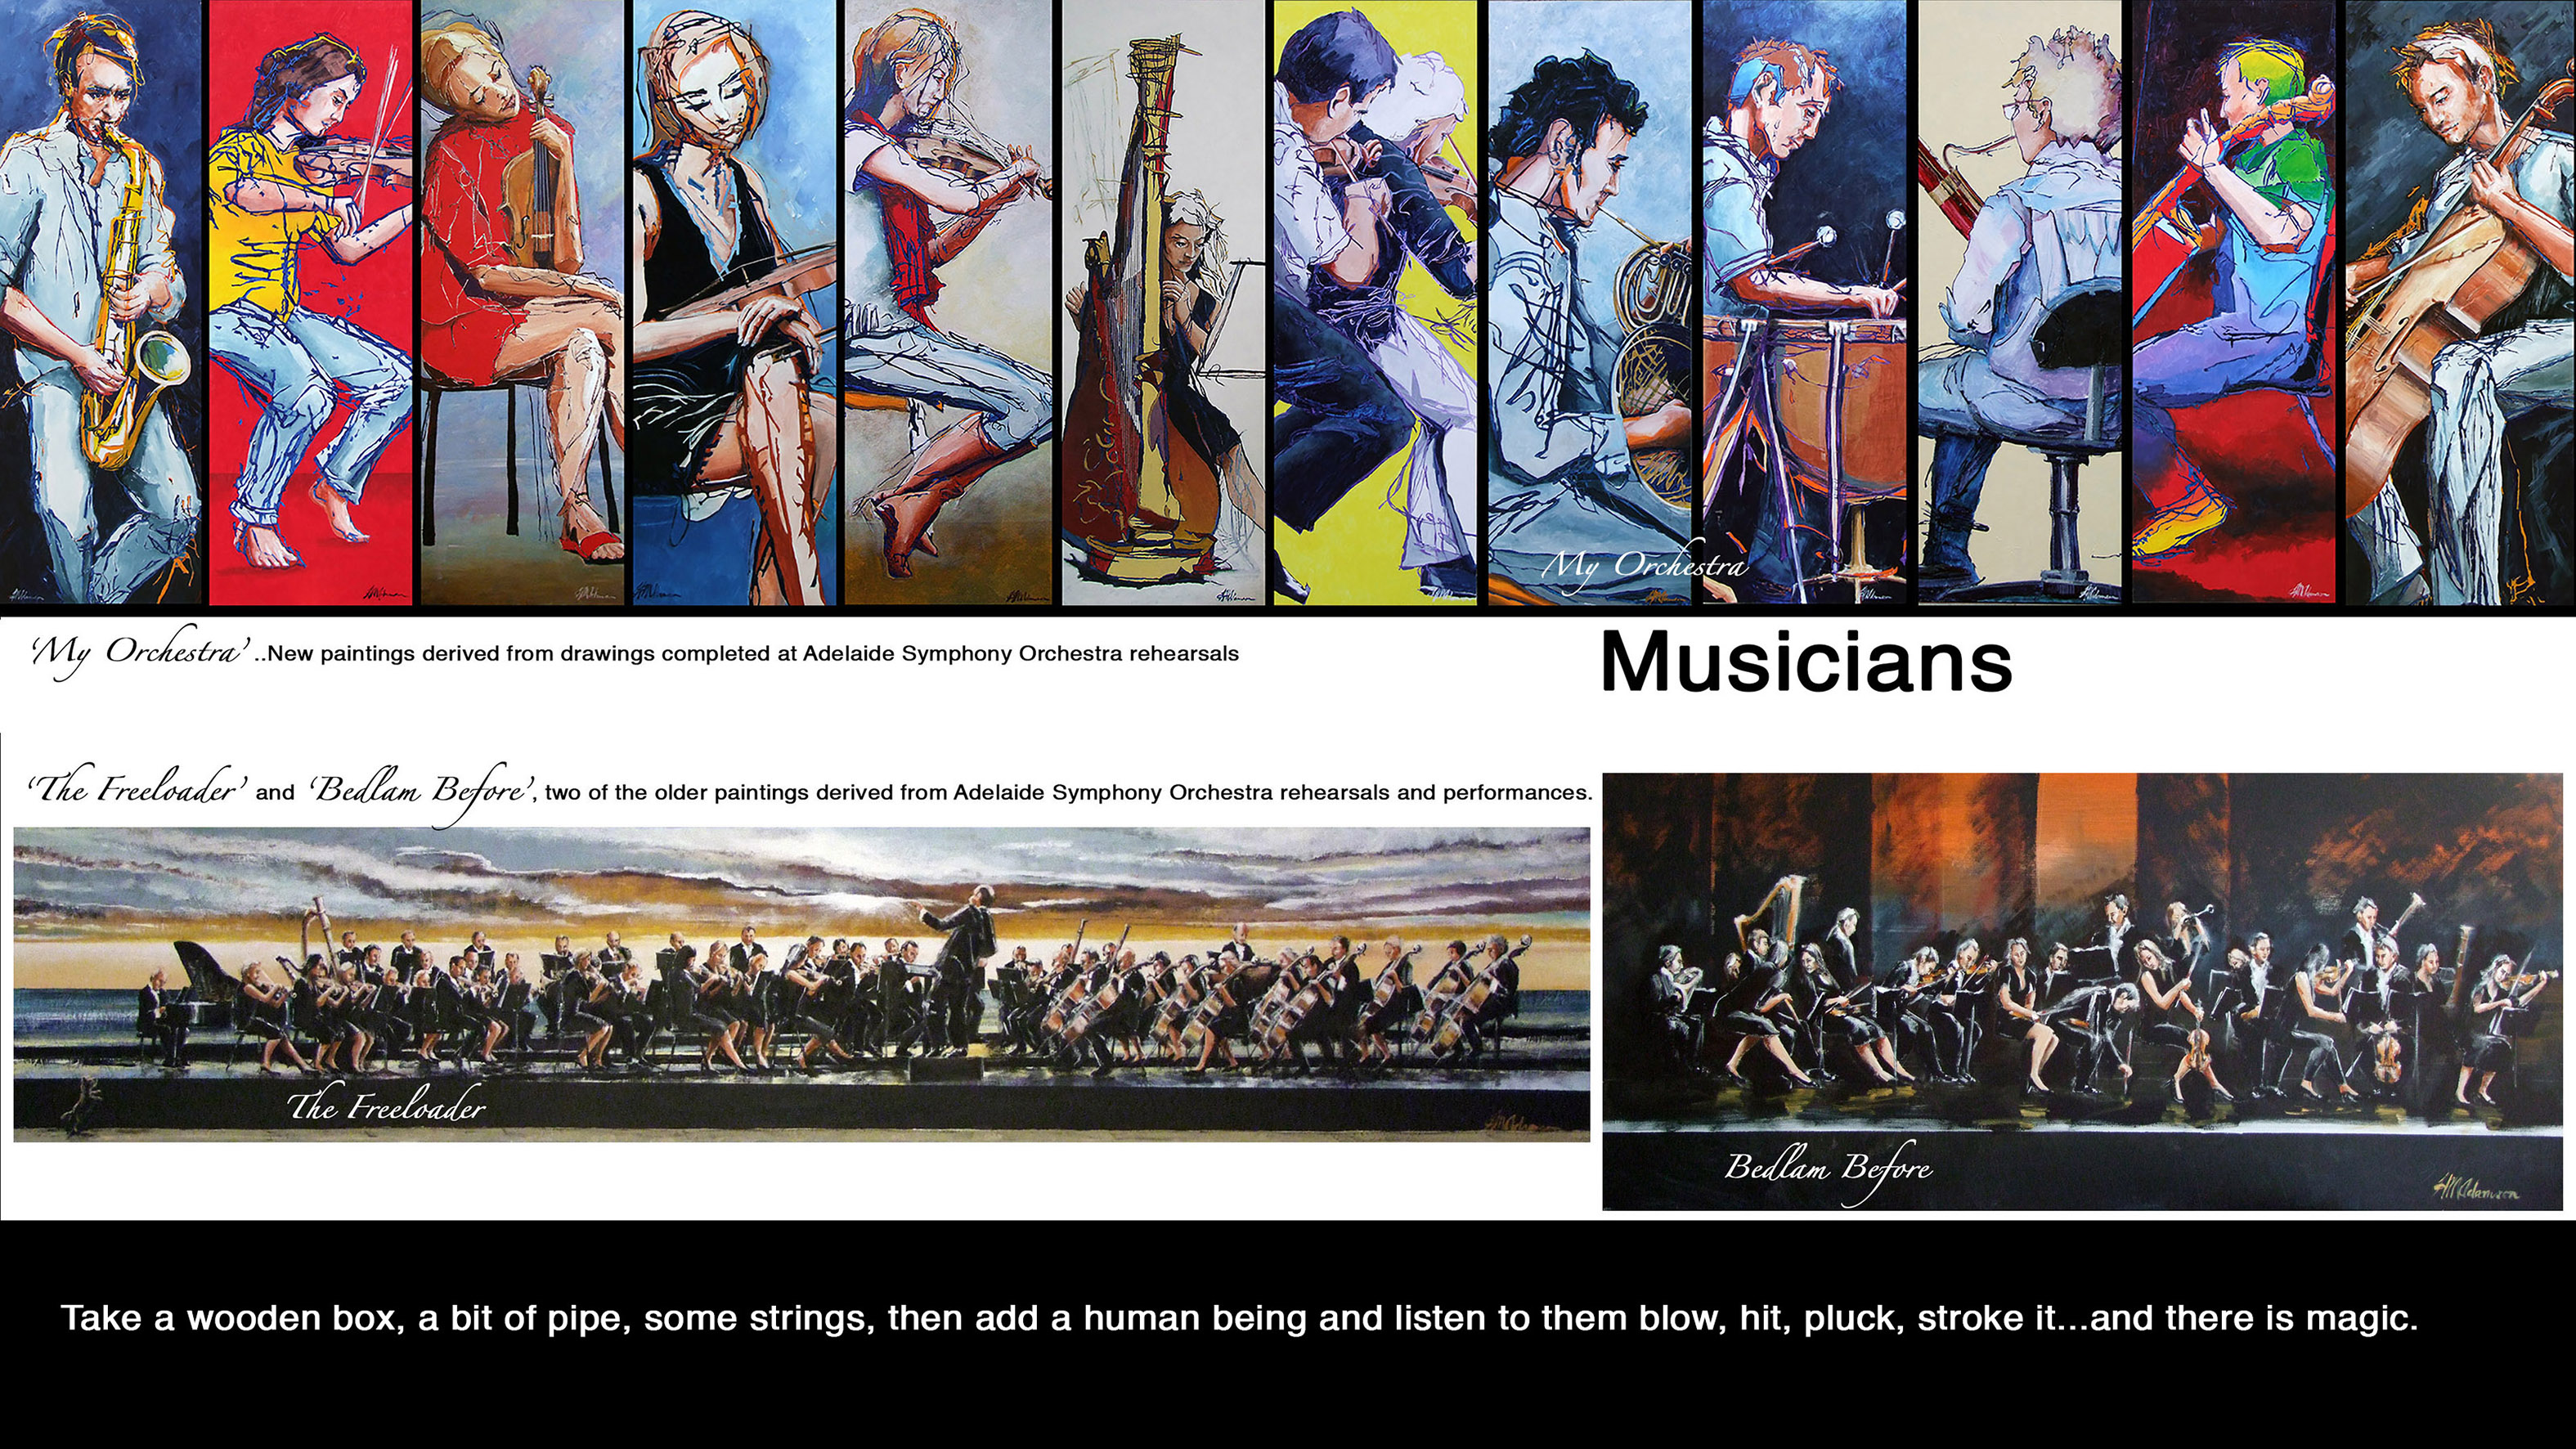 'My Orchestra'..shows Muratti paintings with some older orchestra paintings